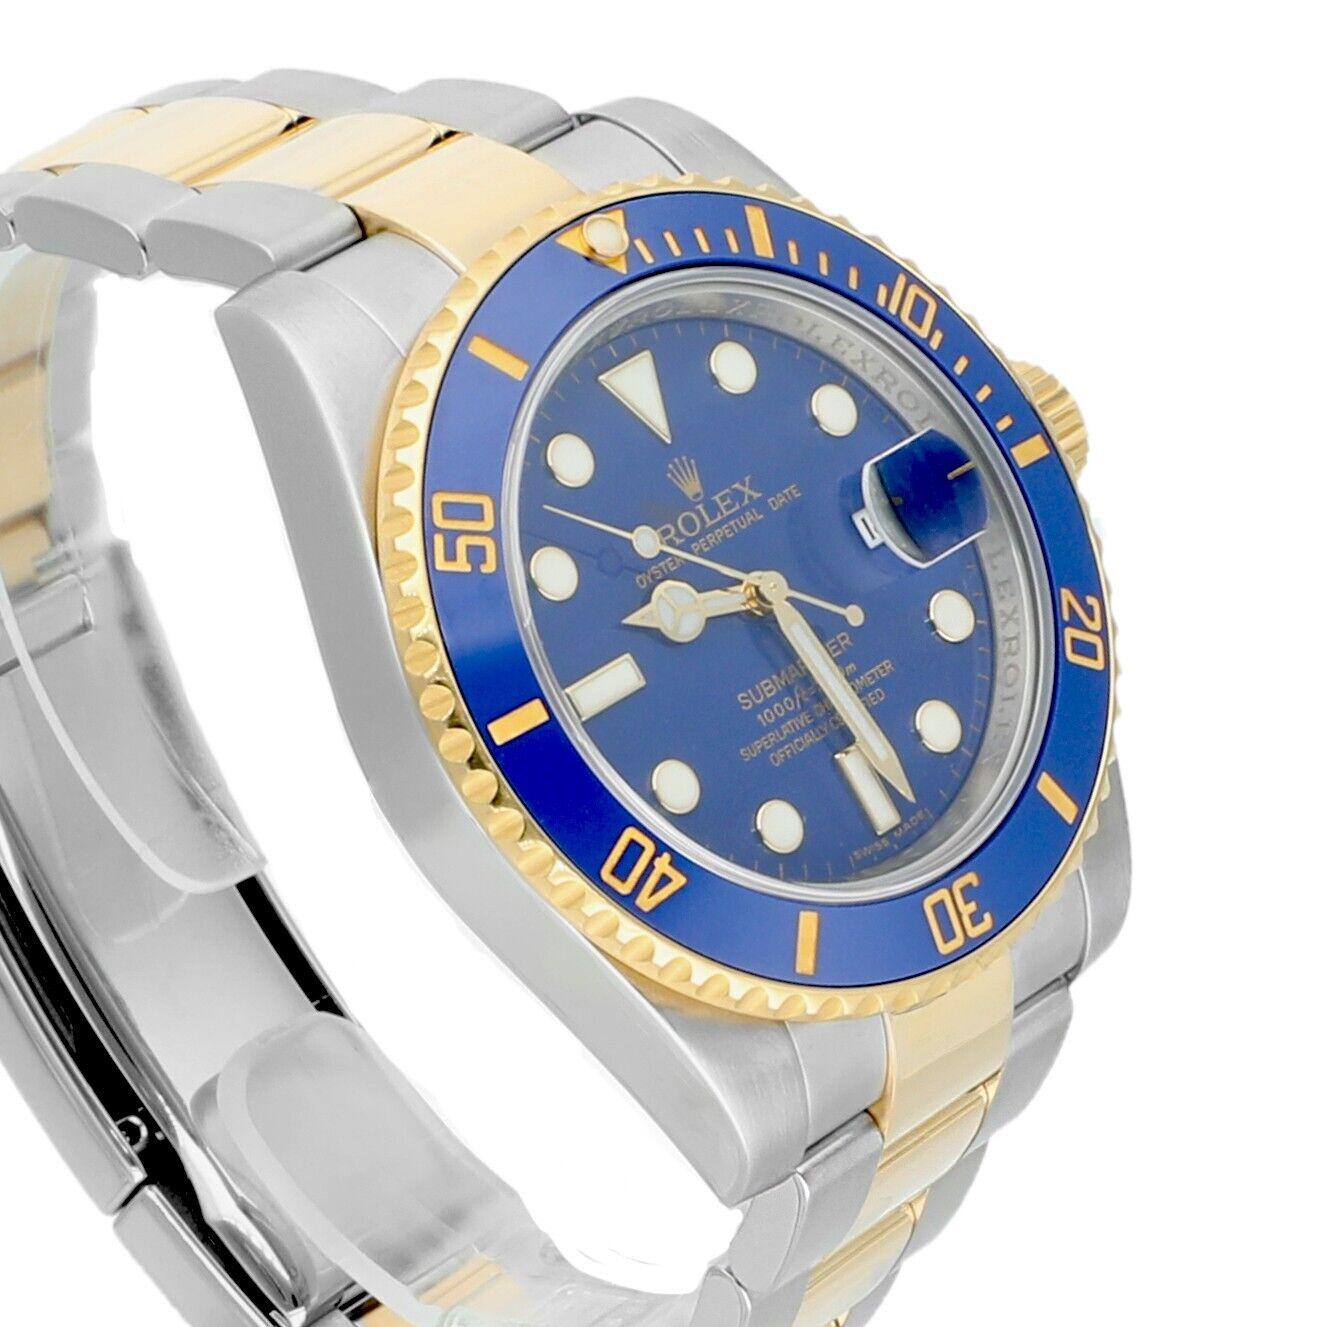 Rolex Submariner Date 116613LB Ceramic Bezel Yellow Gold/Stainless Steel Watch For Sale 1